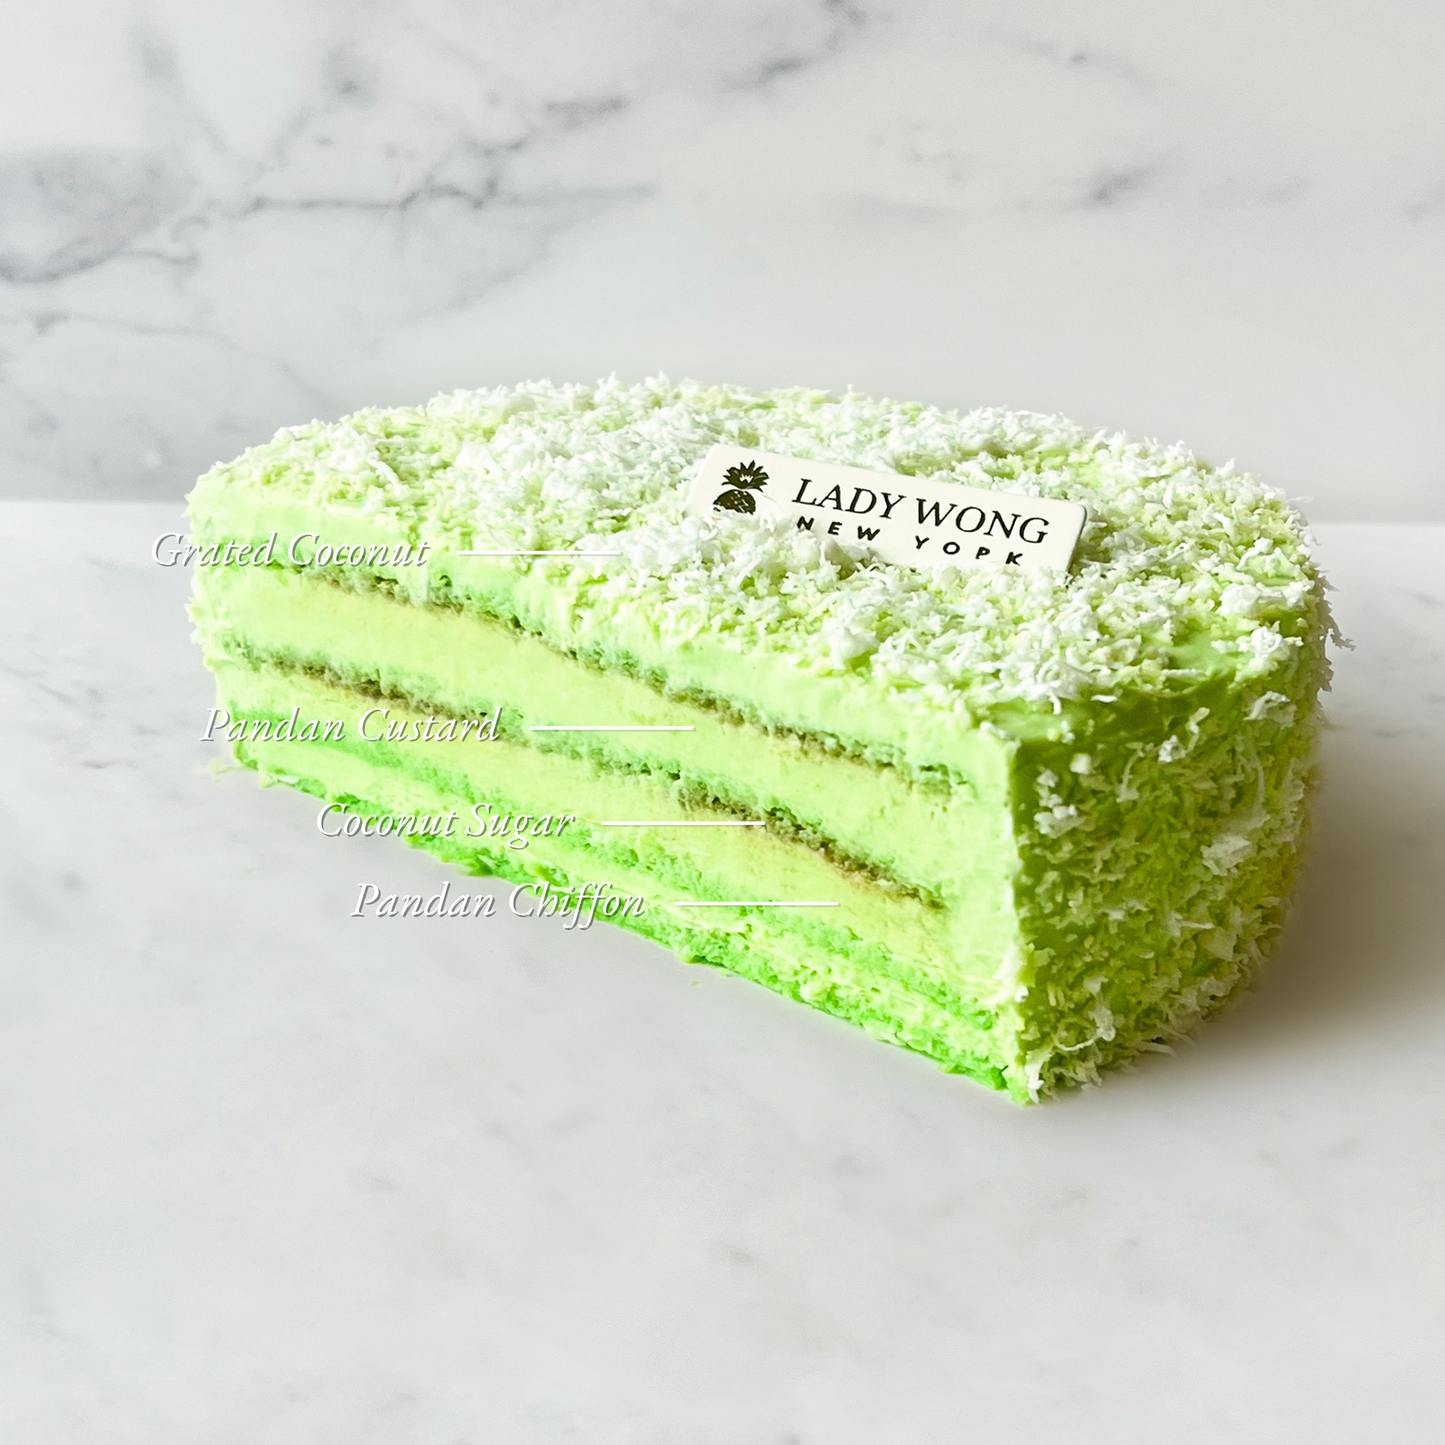 Pandan Layer Cake - 6 inches (Pick up Today!)